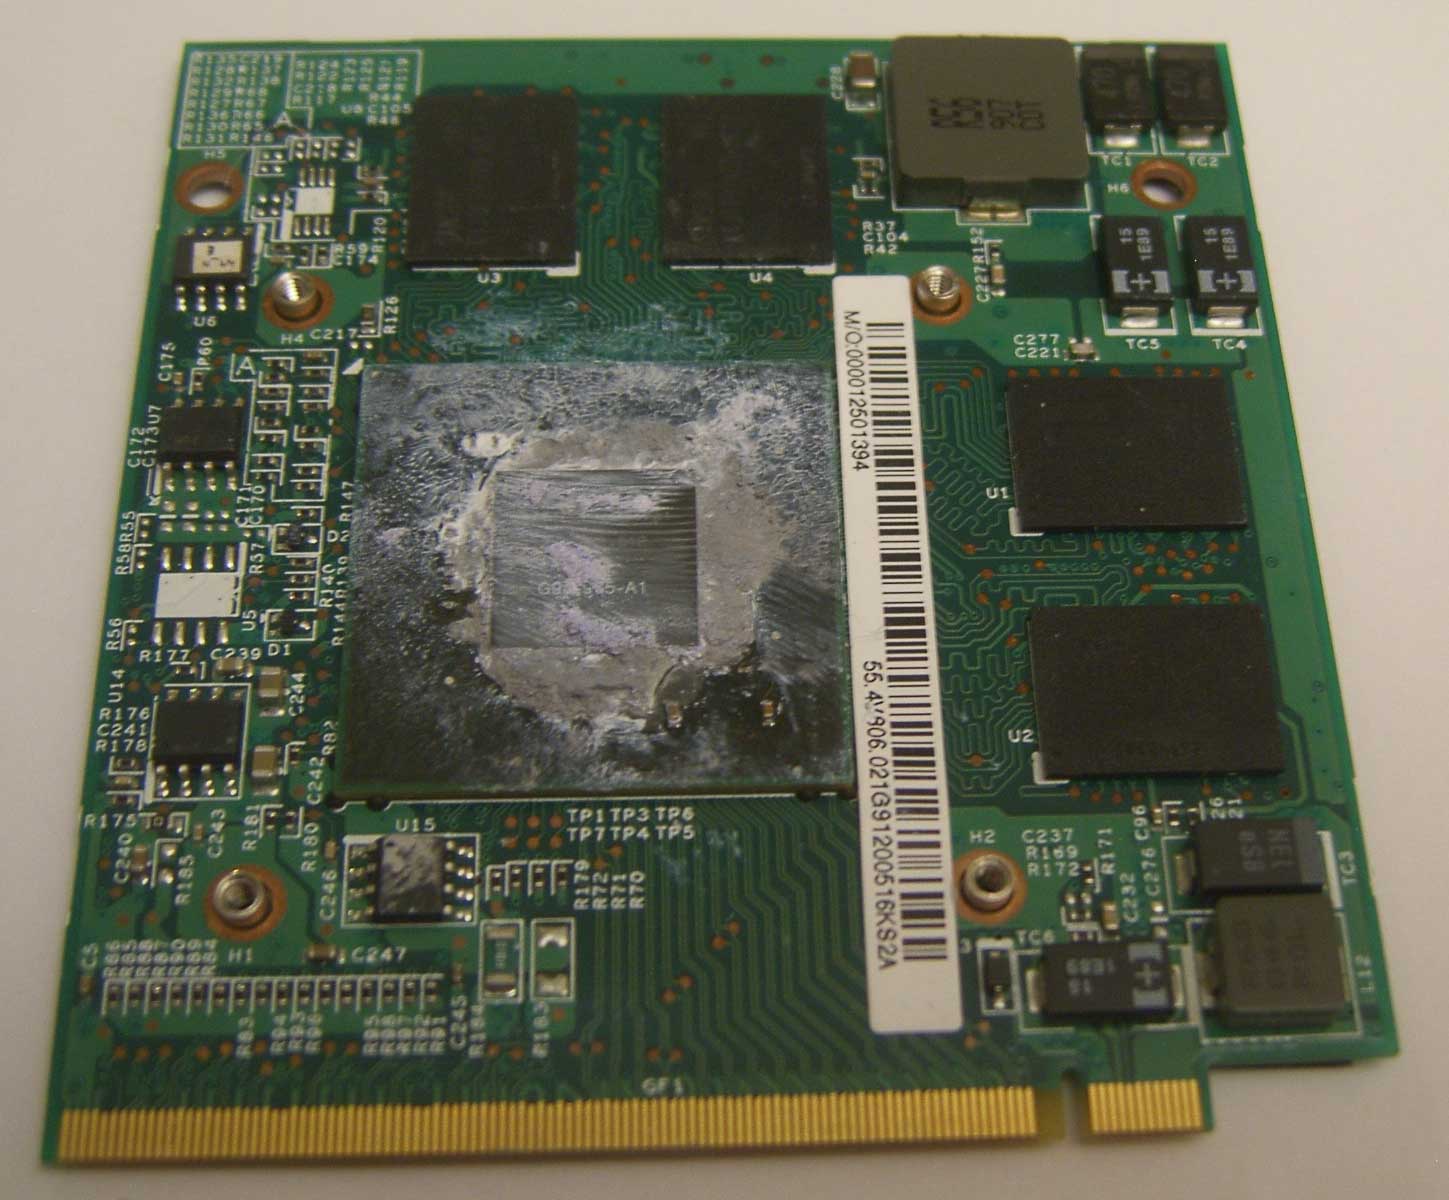 SRG3 HP 8530w FX770M NVIDIA Graphic Card 512Mb SPARES